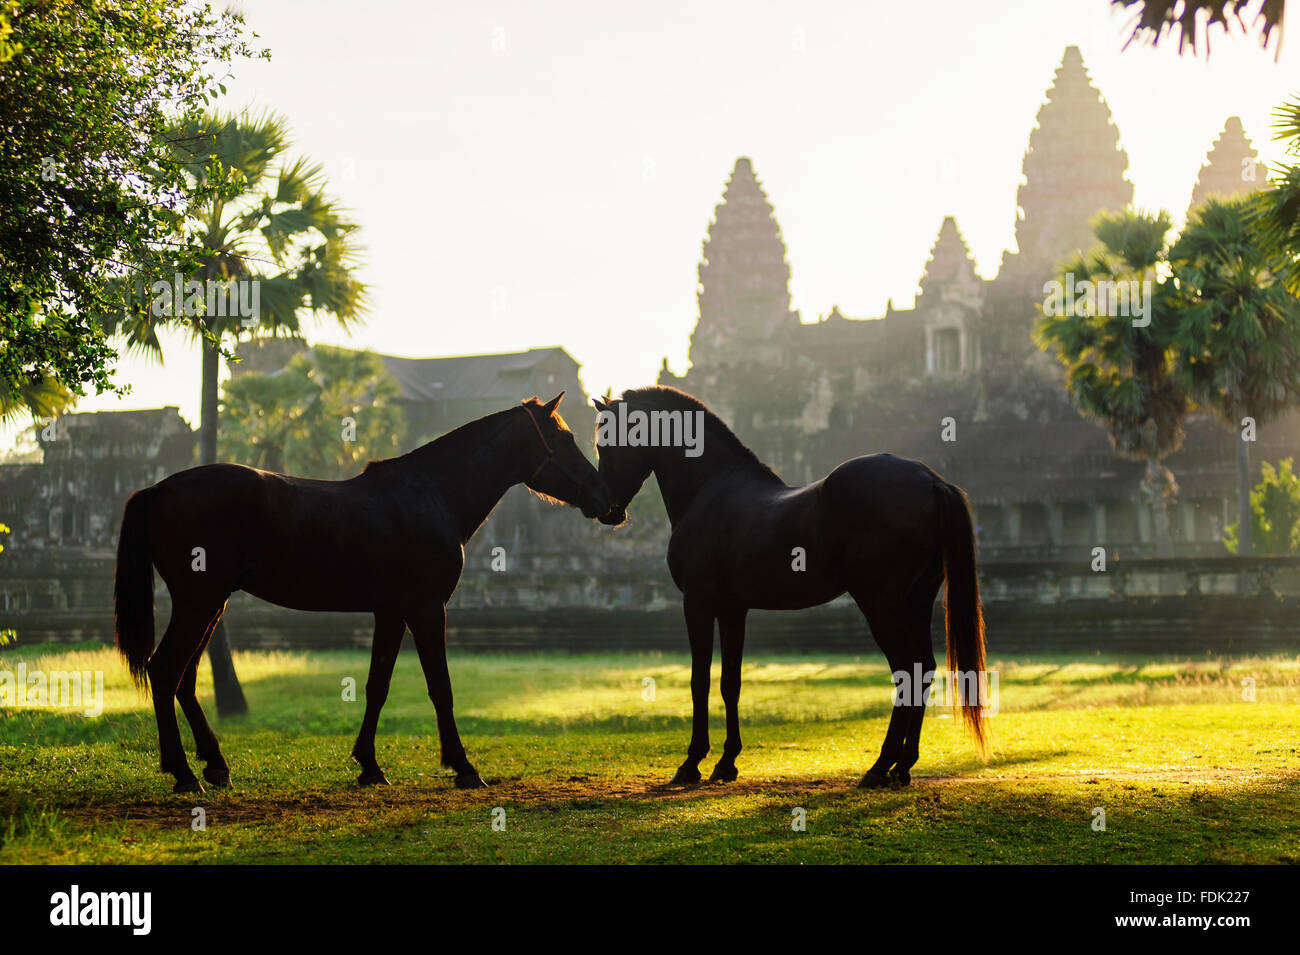 Side view of two horses standing In front of Angkor wat, Siem Reap, Cambodia Stock Photo